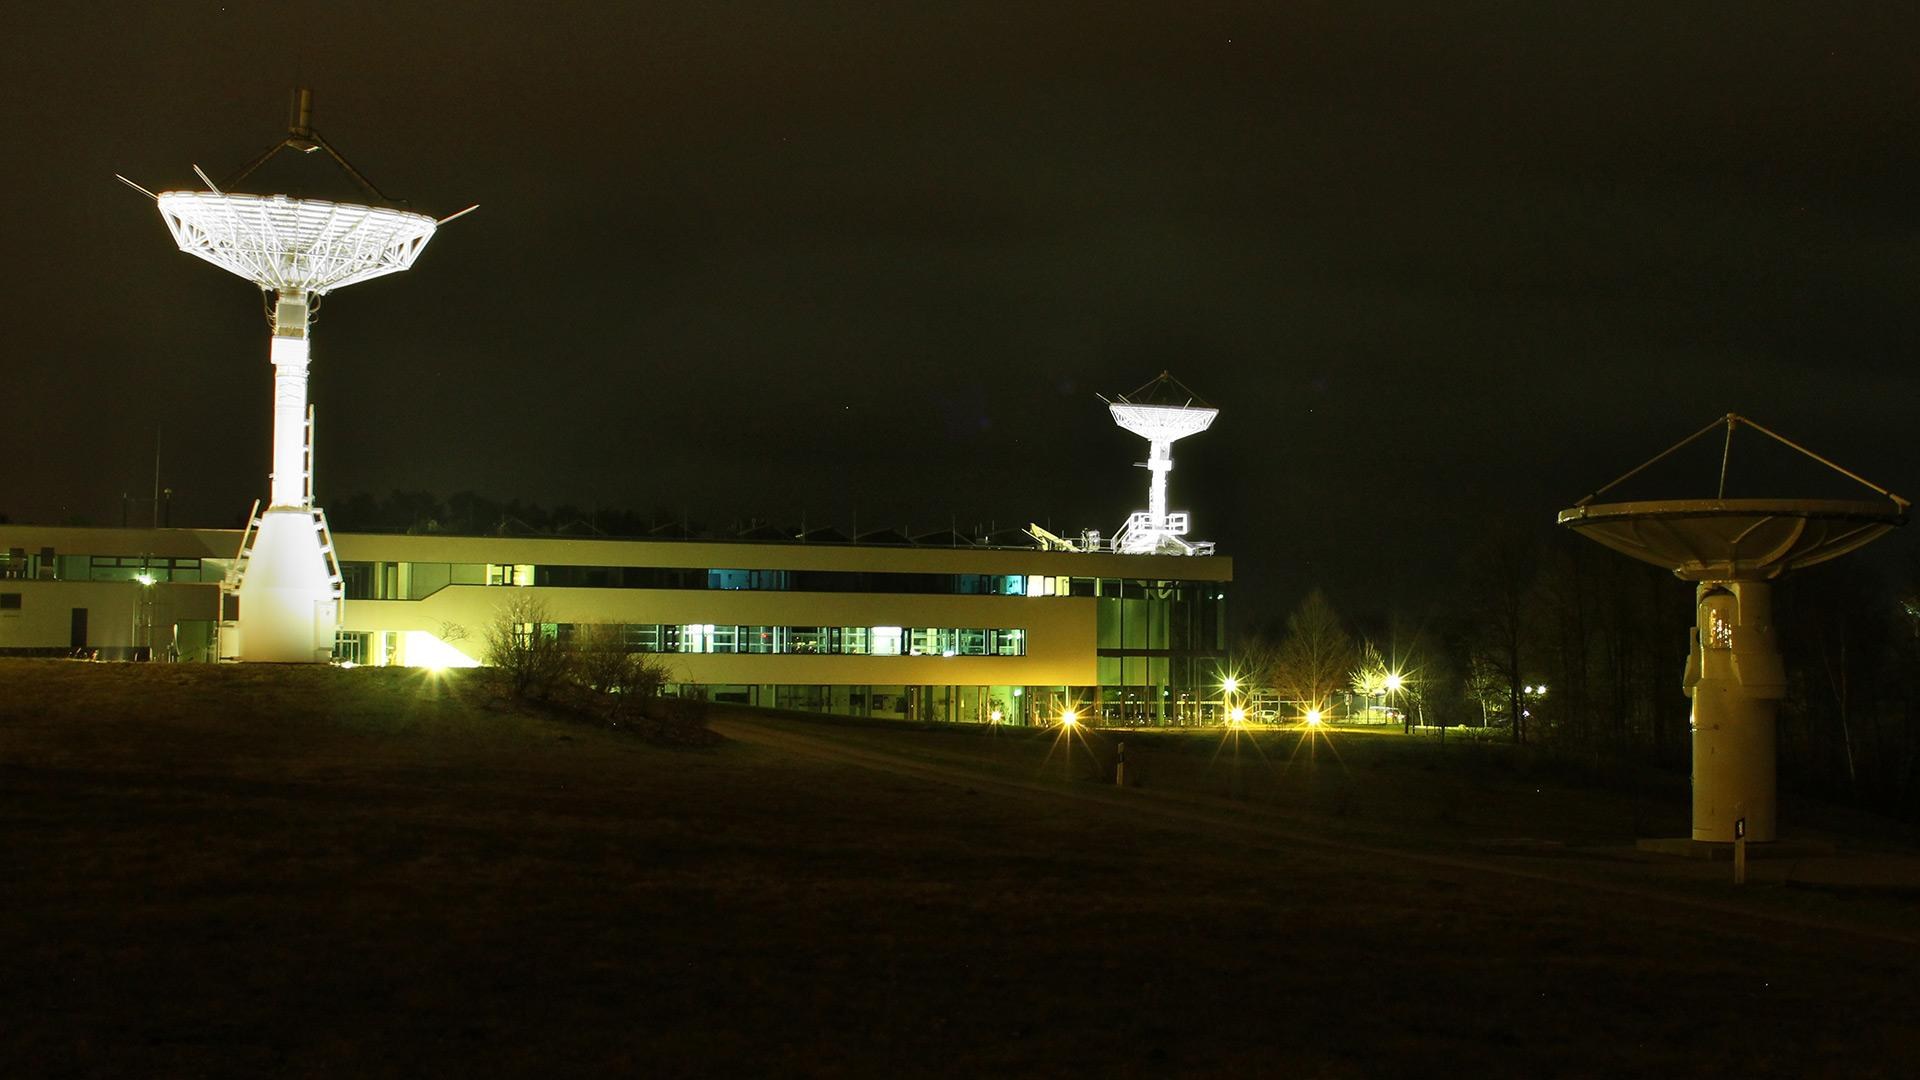 Space weather research at DLR’s Neustrelitz site